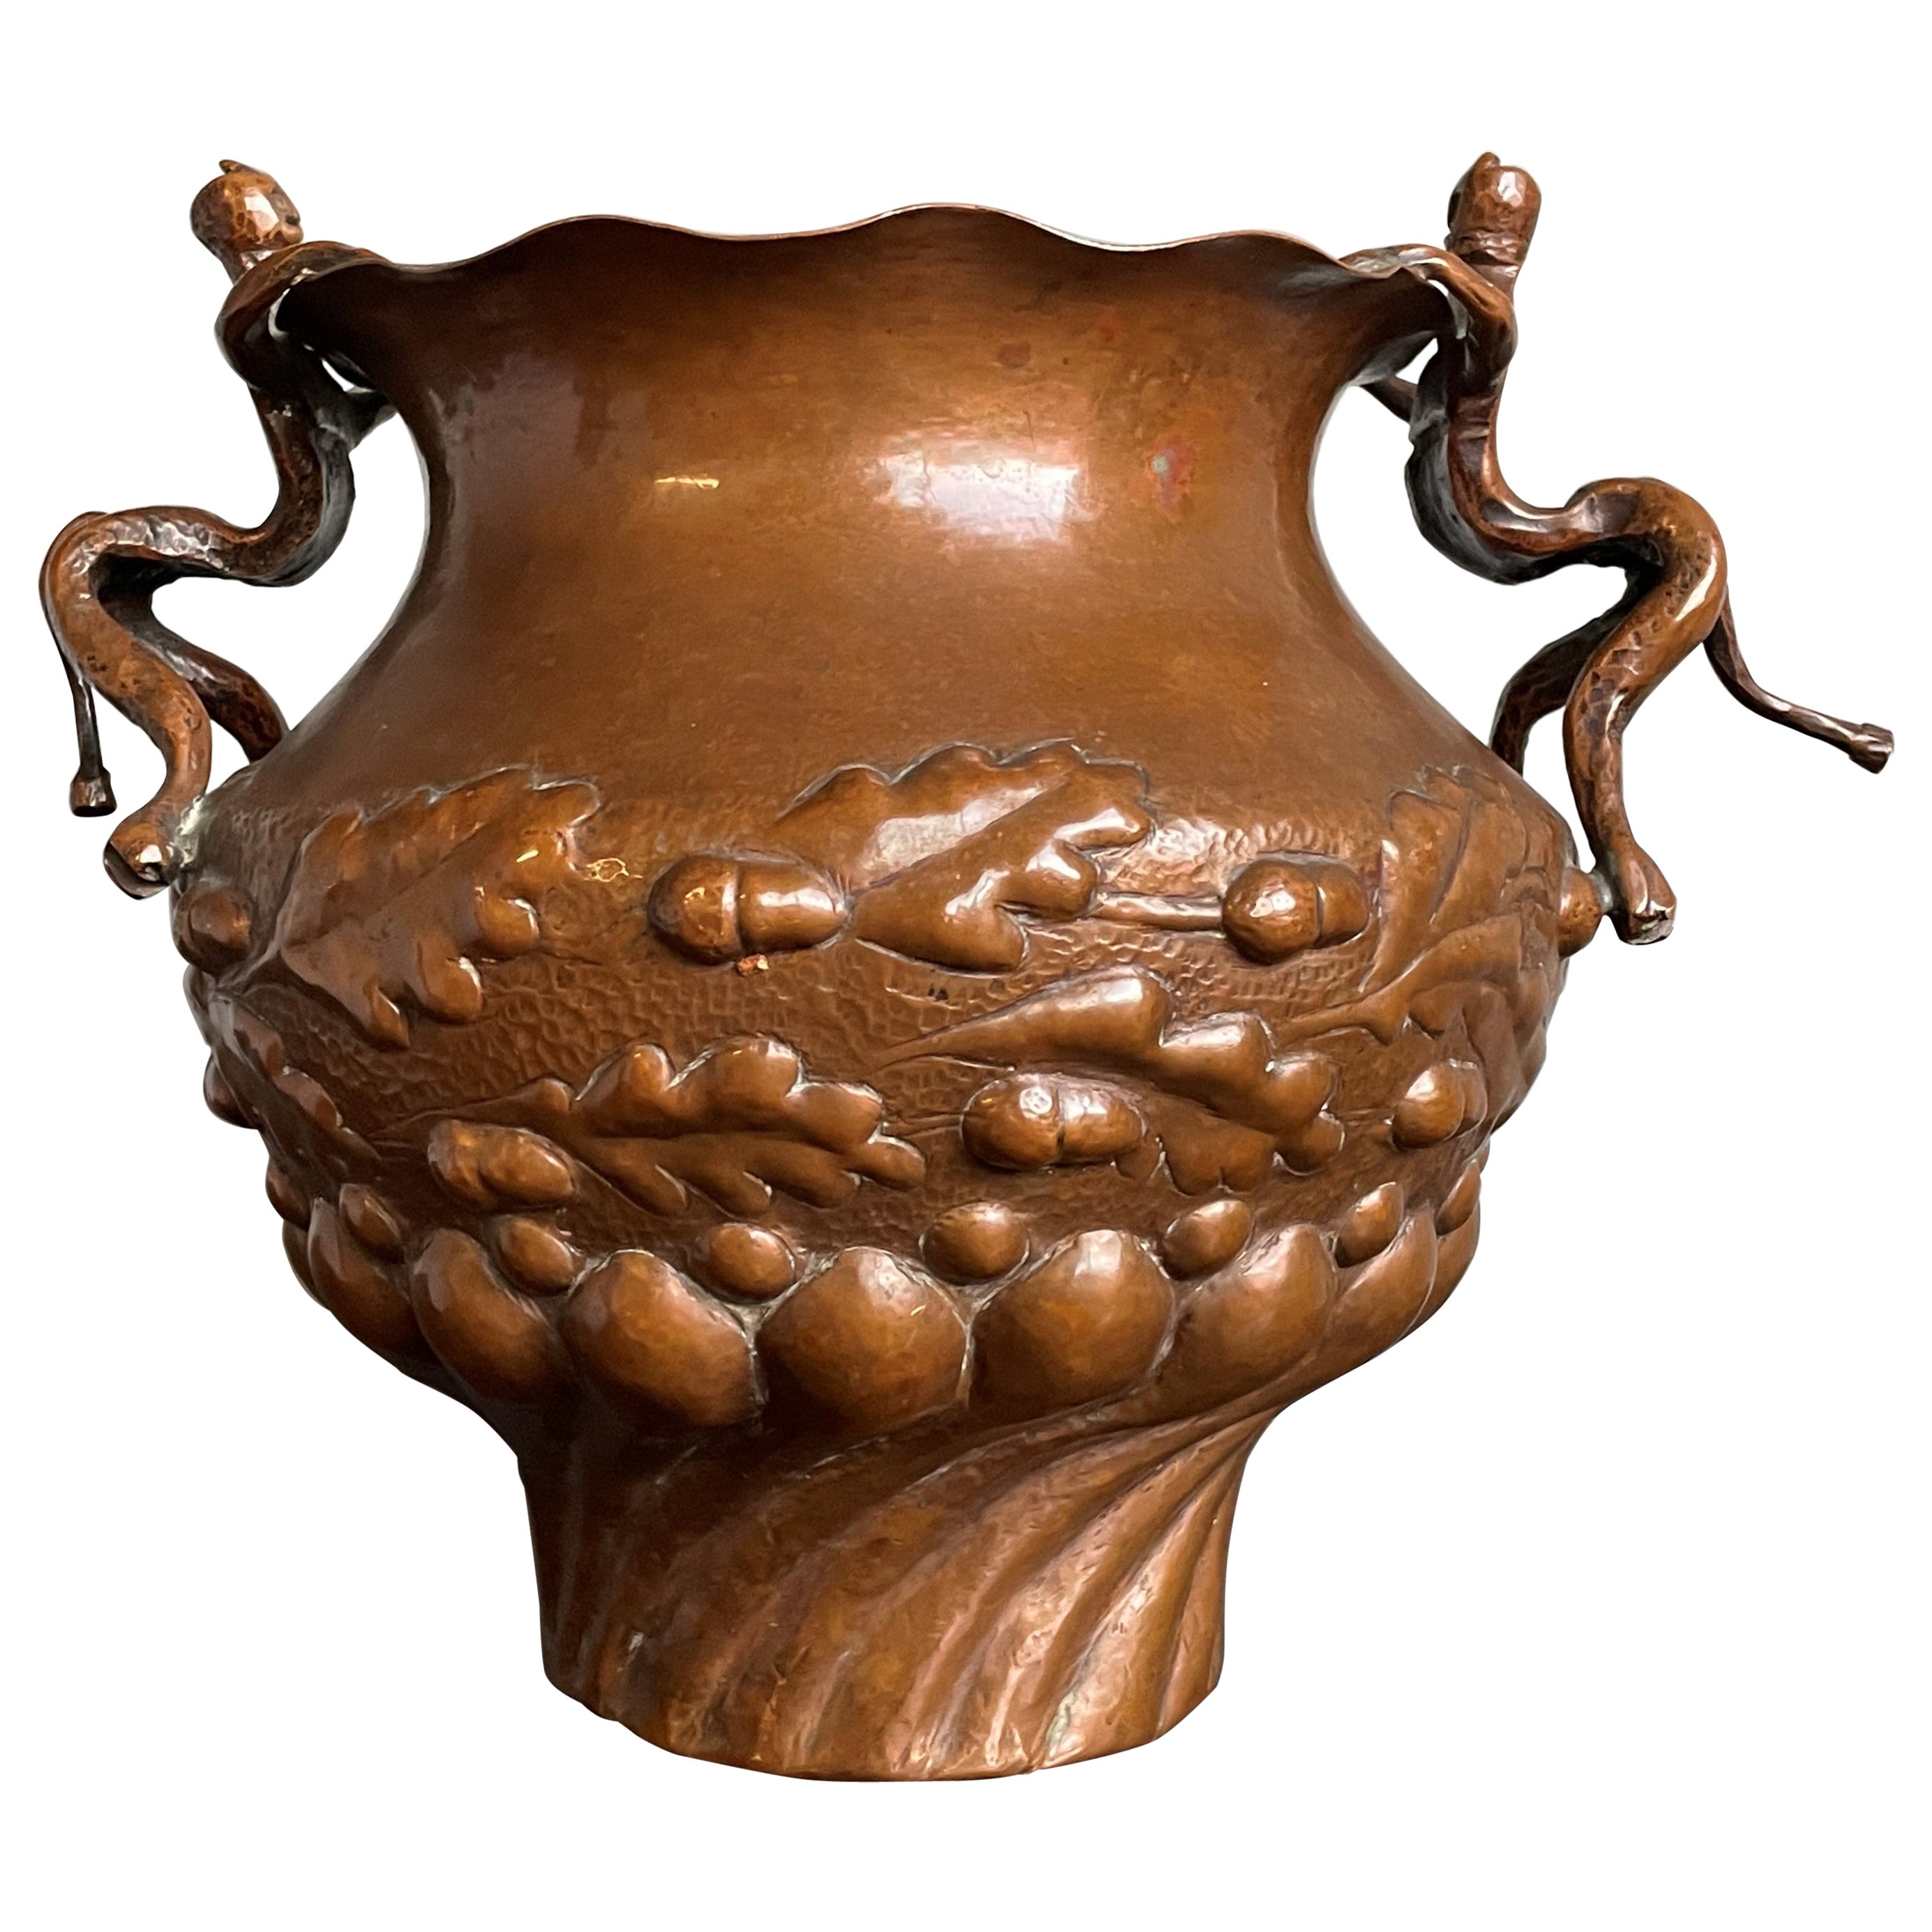 Unique Mid 1800s Embossed Copper Planter / Vase with Satyr Sculptures as Handles For Sale